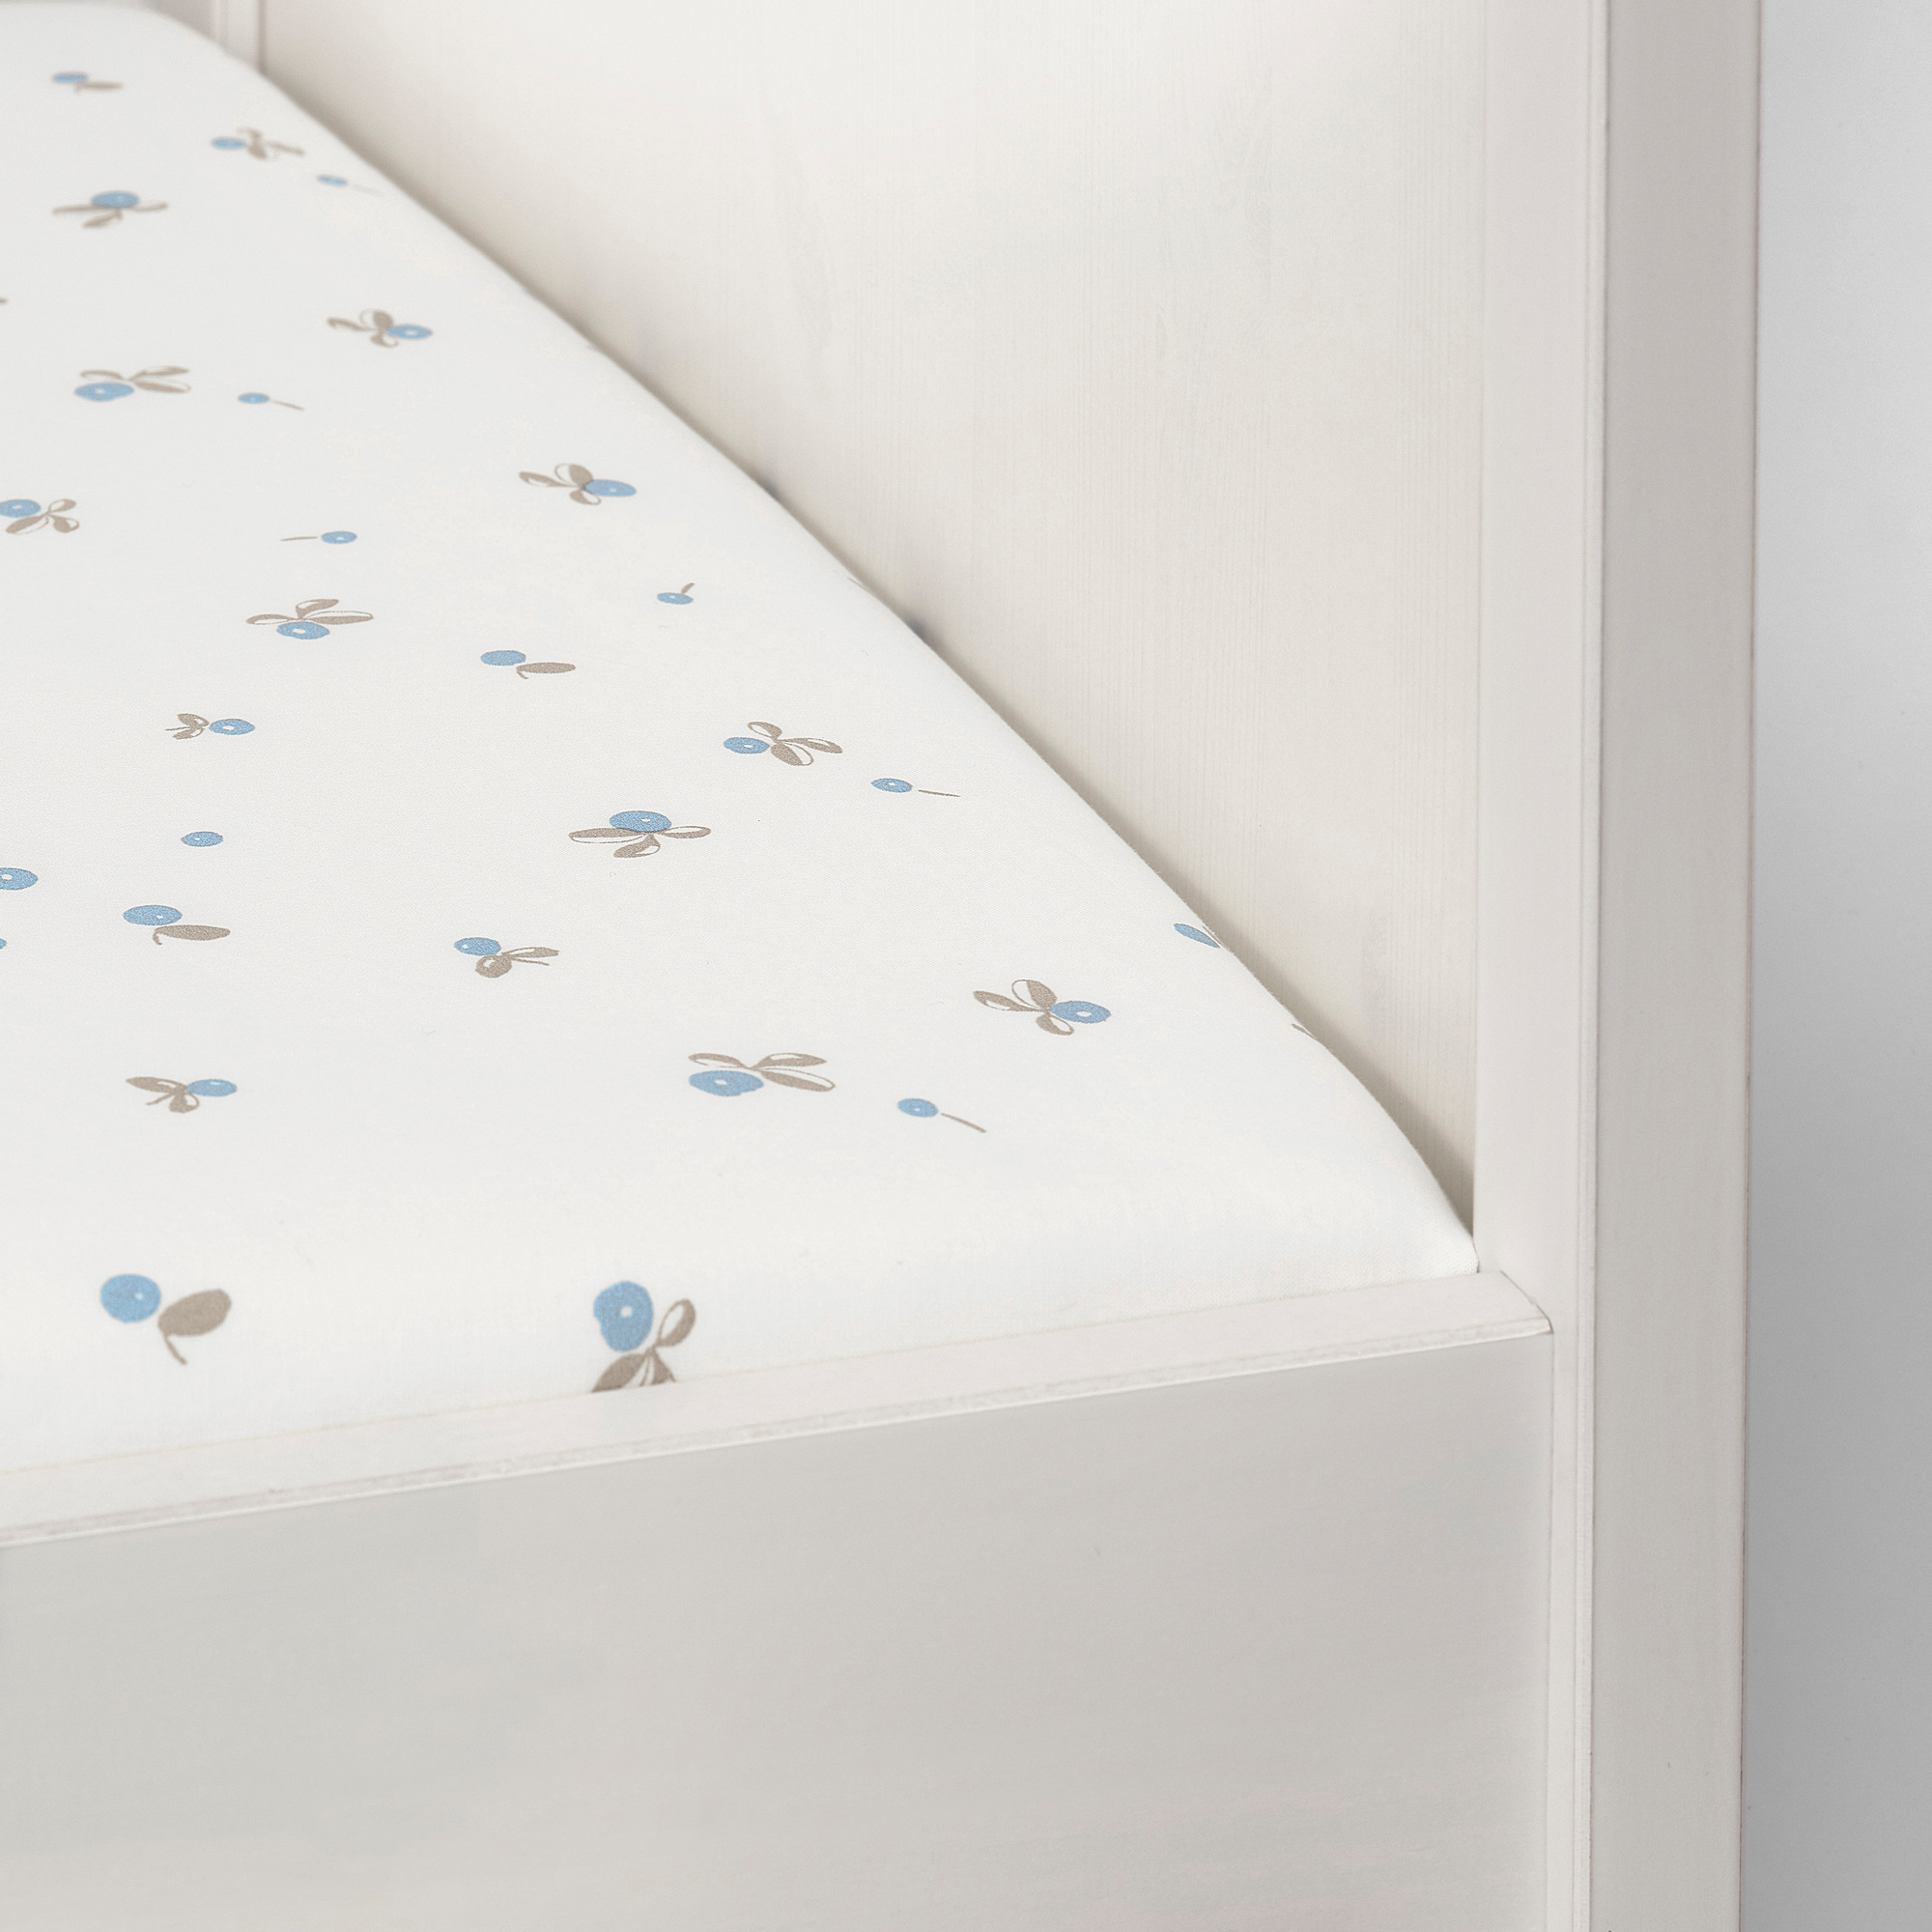 RÖDHAKE fitted sheet for cot